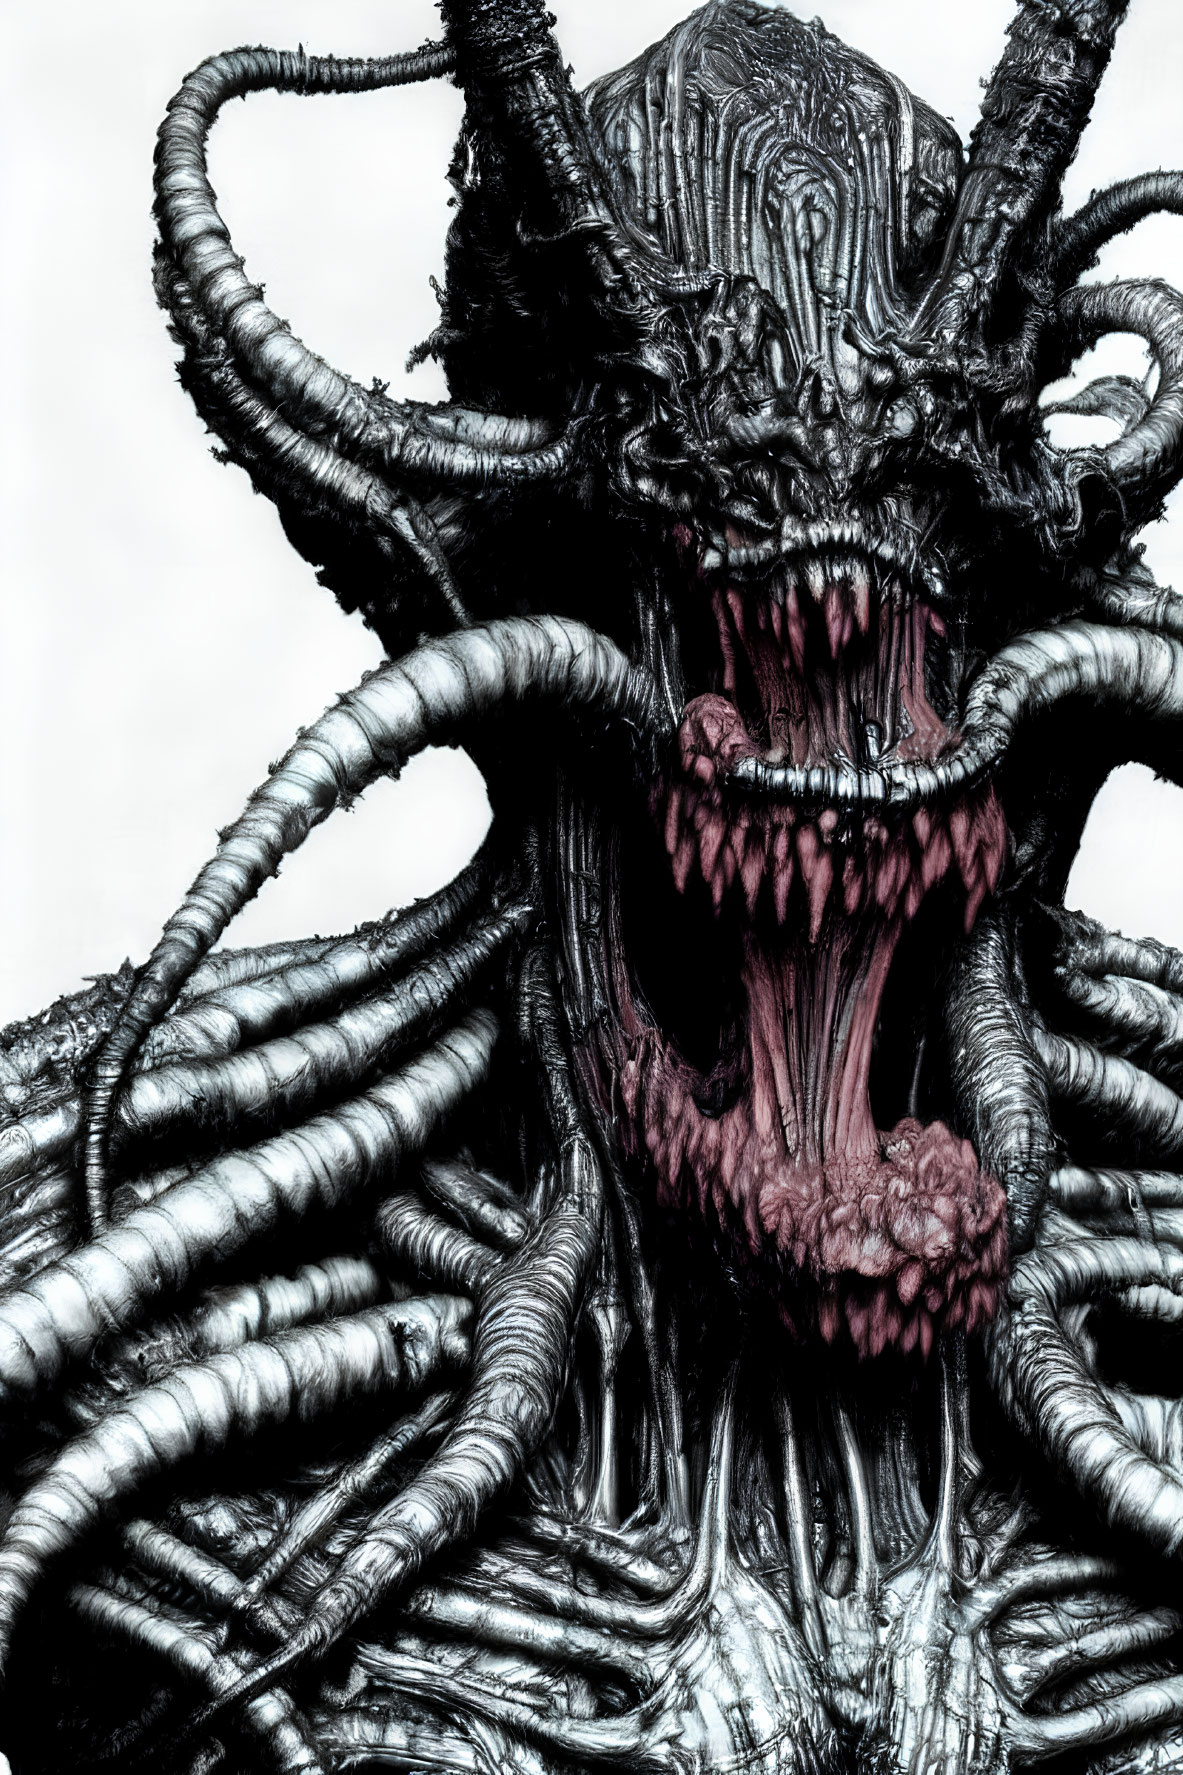 Monstrous creature with tentacles, sharp teeth, and gaping mouth in dark, detailed style